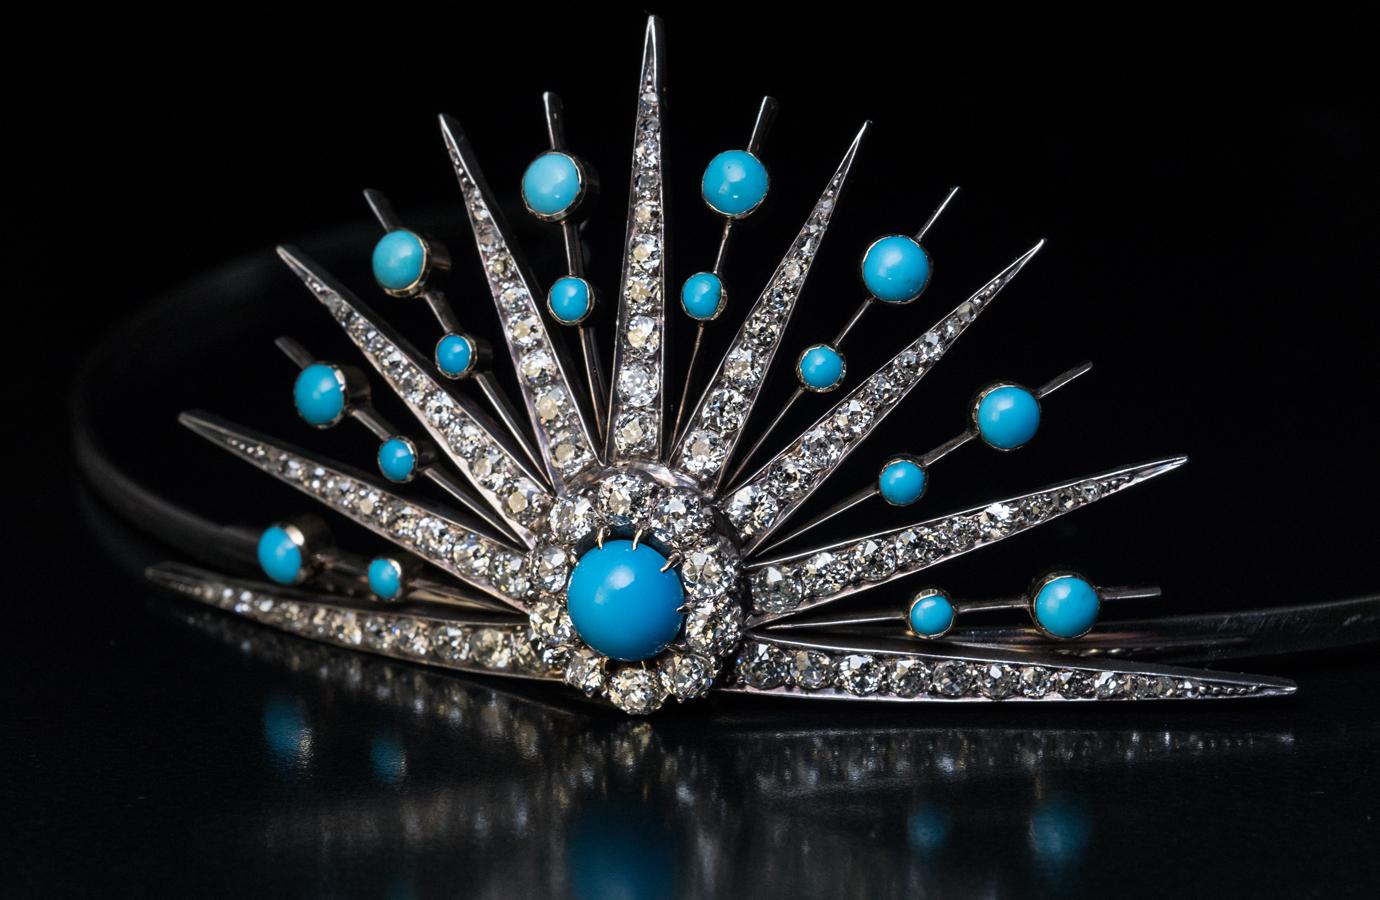 Circa 1880

This elegant Victorian era sunburst tiara is finely crafted in gold and silver. The tiara is embellished with vivid blue turquoise cabochons and bright white old mine cut diamonds of good quality (F-G-H color, VS2-SI2 clarity).

The